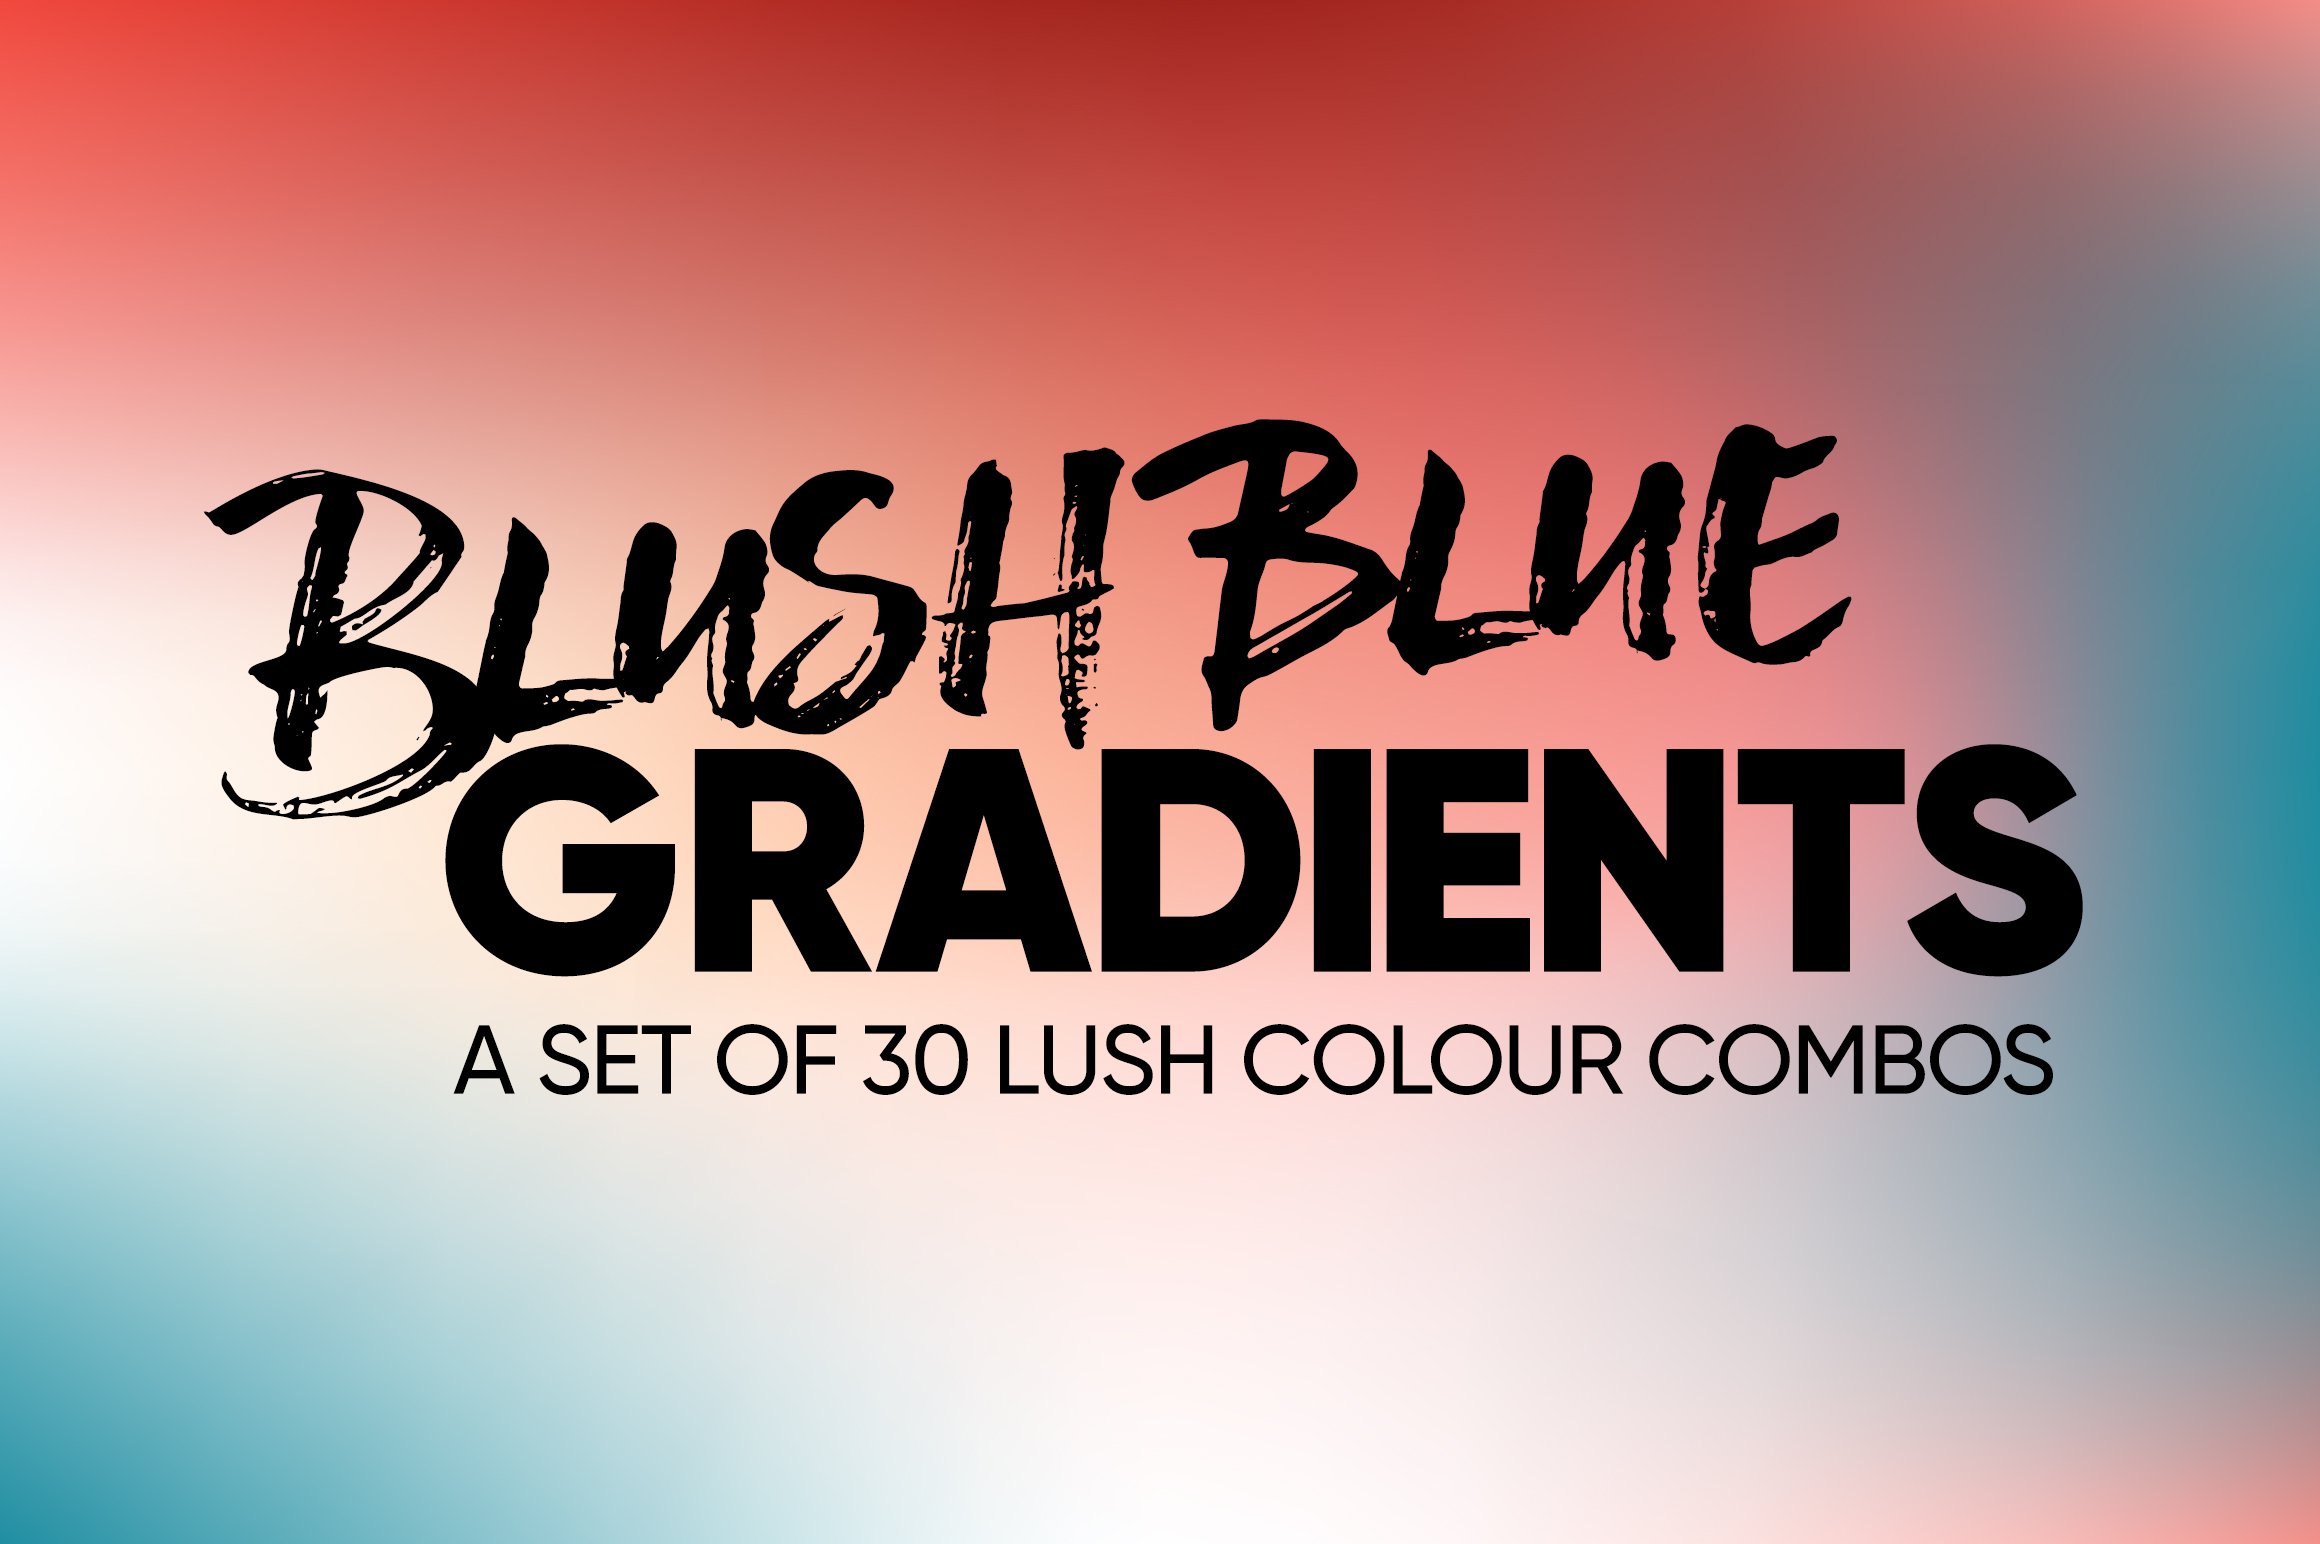 Blush Blue Gradientscover image.